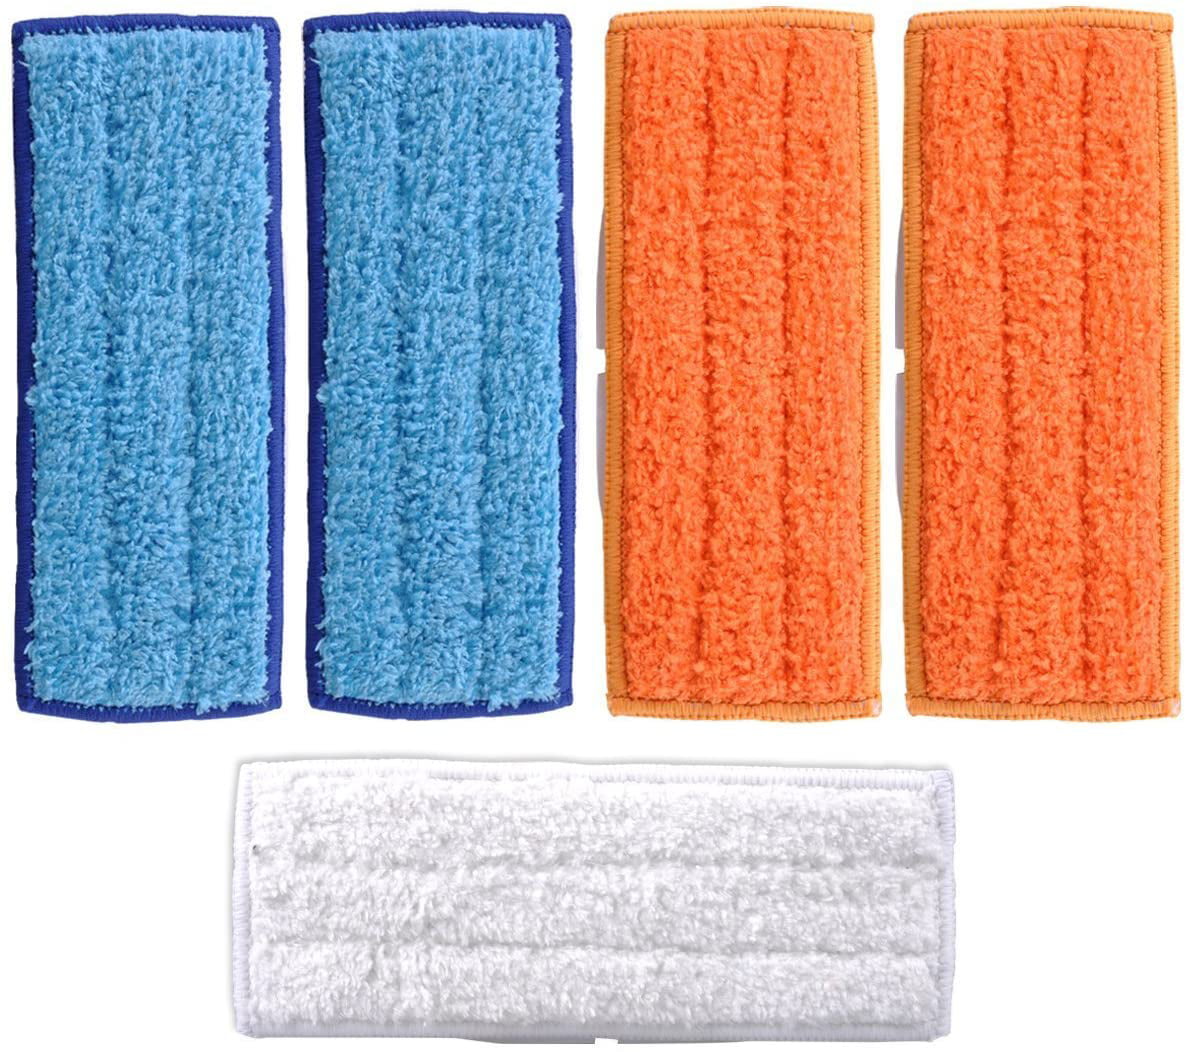 3x Replacement Washable Wet Dry Mopping Pads for iRobot Braava Jet 240 Cleaner 